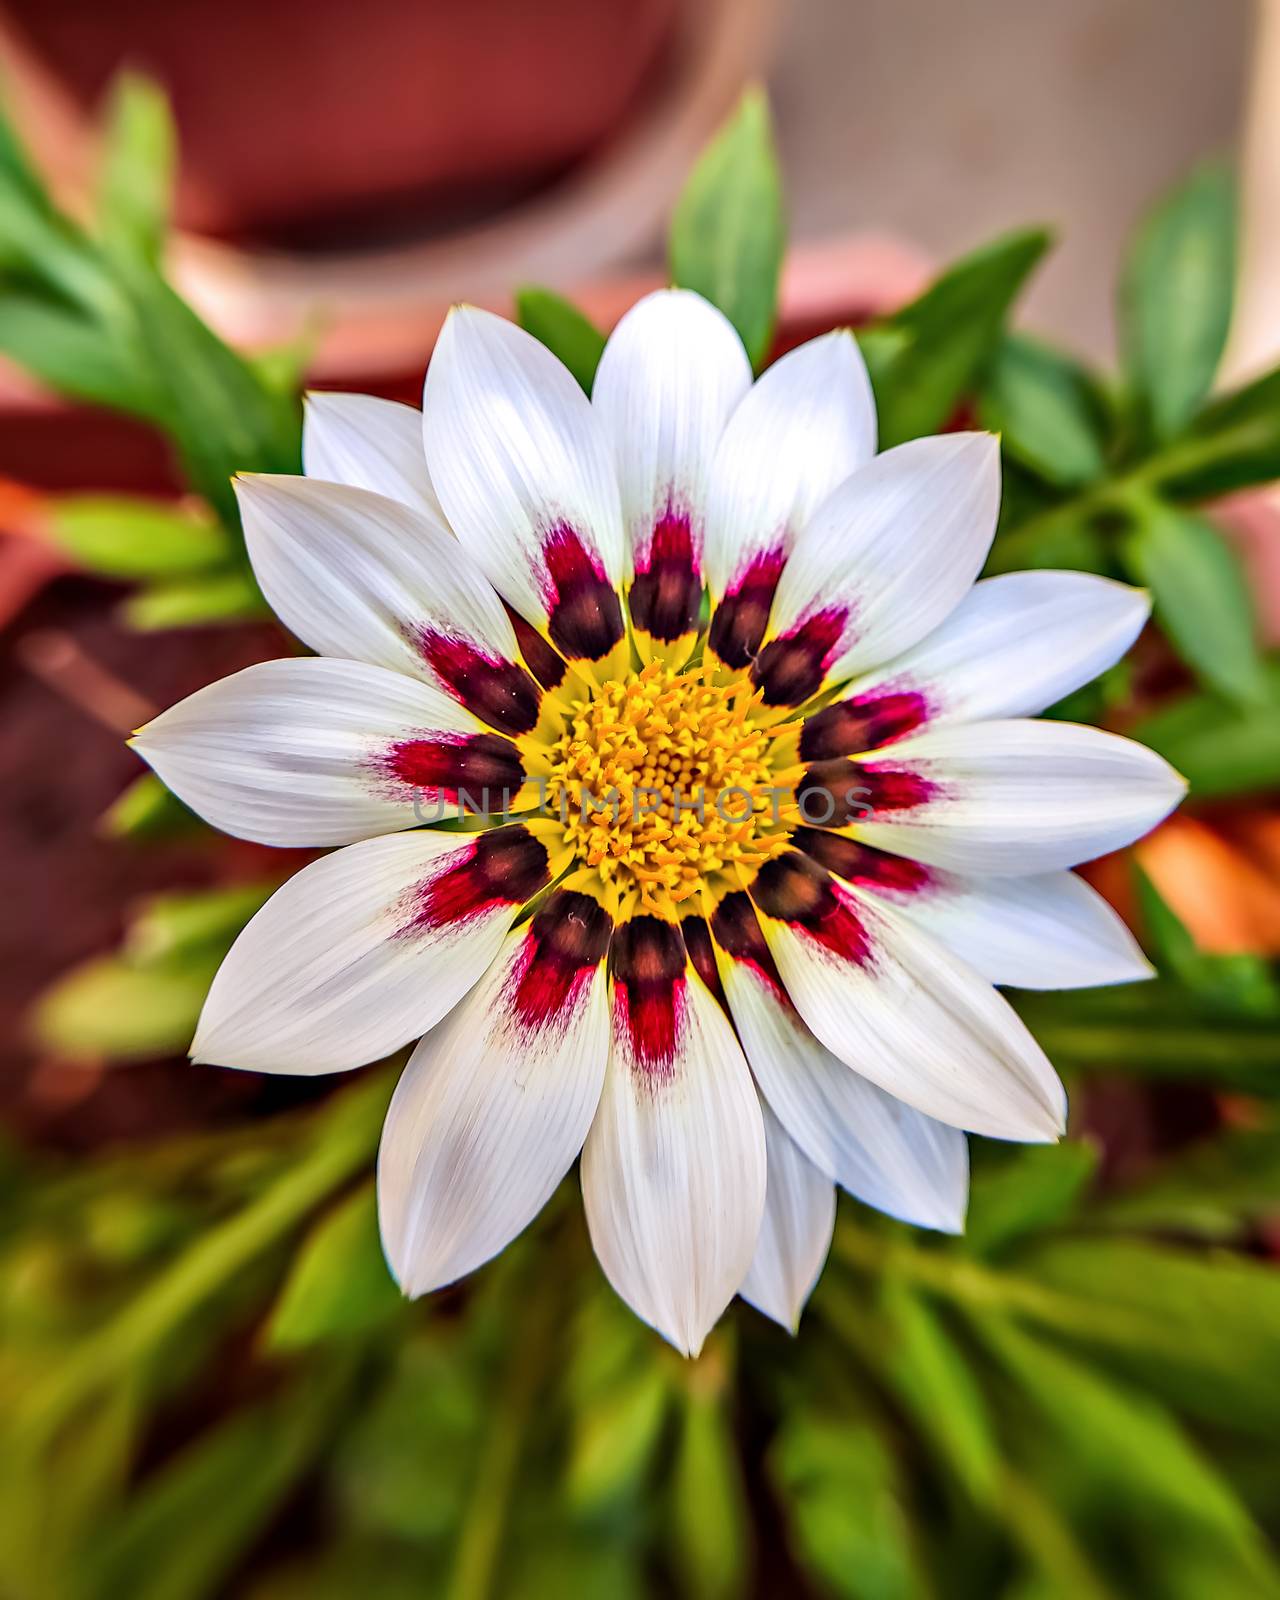 Isolated, close-up image of white & pink petals of Gazania flower with yellow center. by lalam